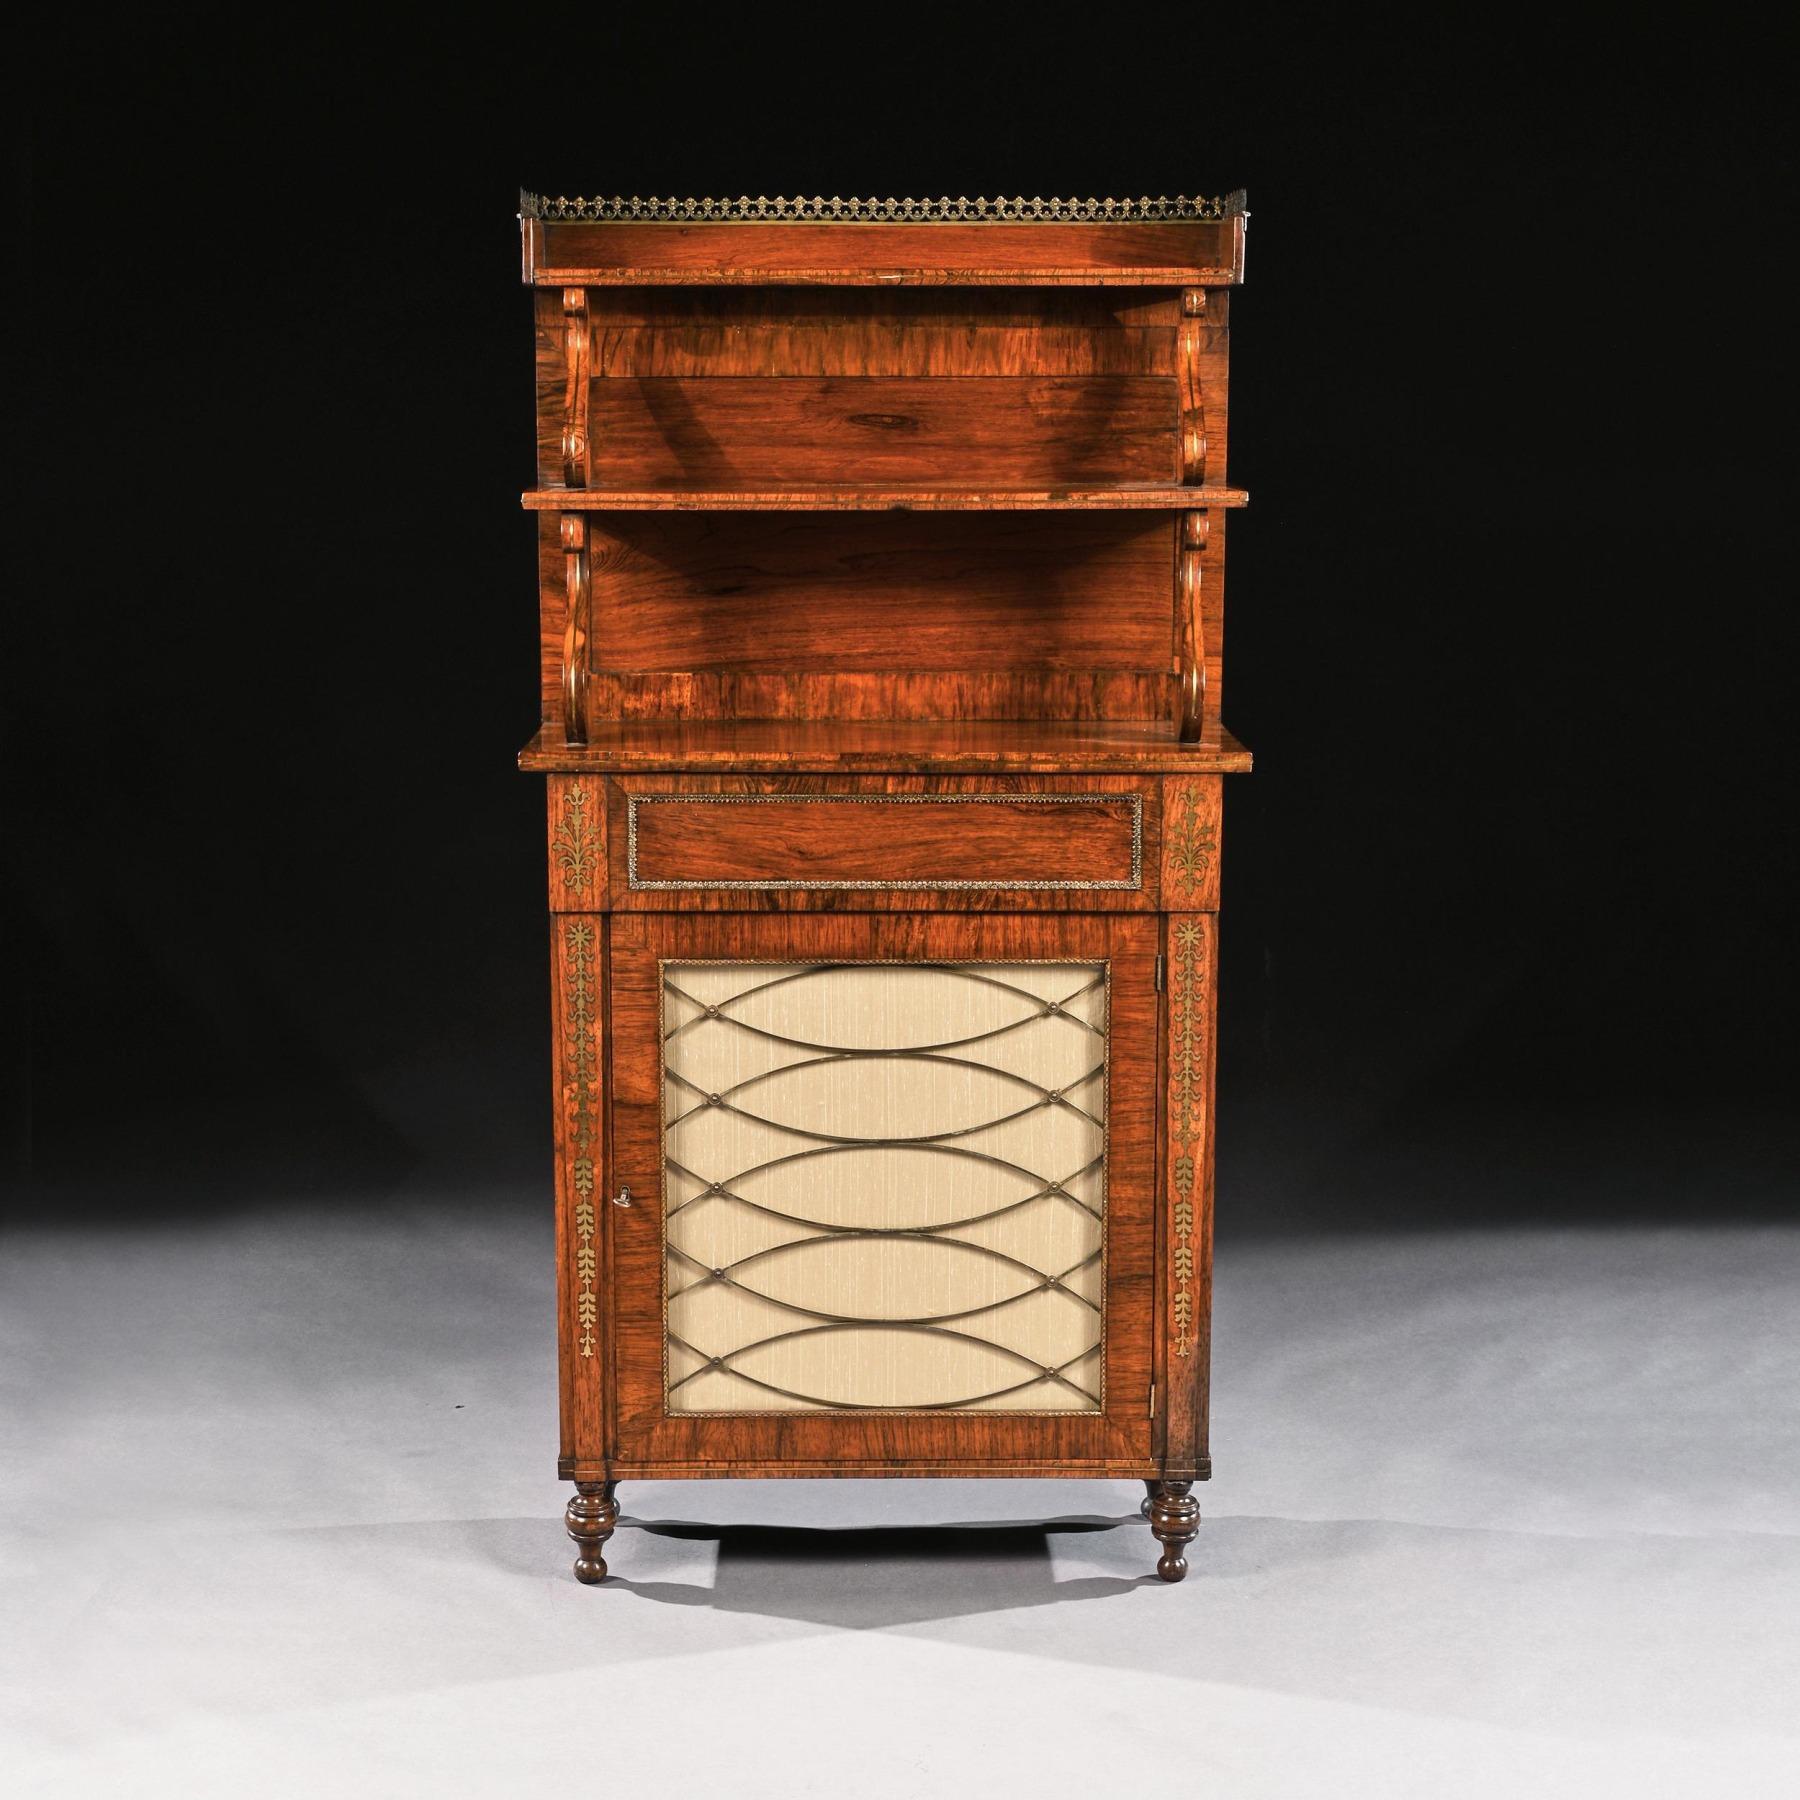 A fine quality Regency antique rosewood and brass inlaid chiffonier of diminutive proportions with waterfall superstructure.

English, circa 1810-1815.

This fine quality Regency chiffonier decorated with brass inlay has a two tier upstand